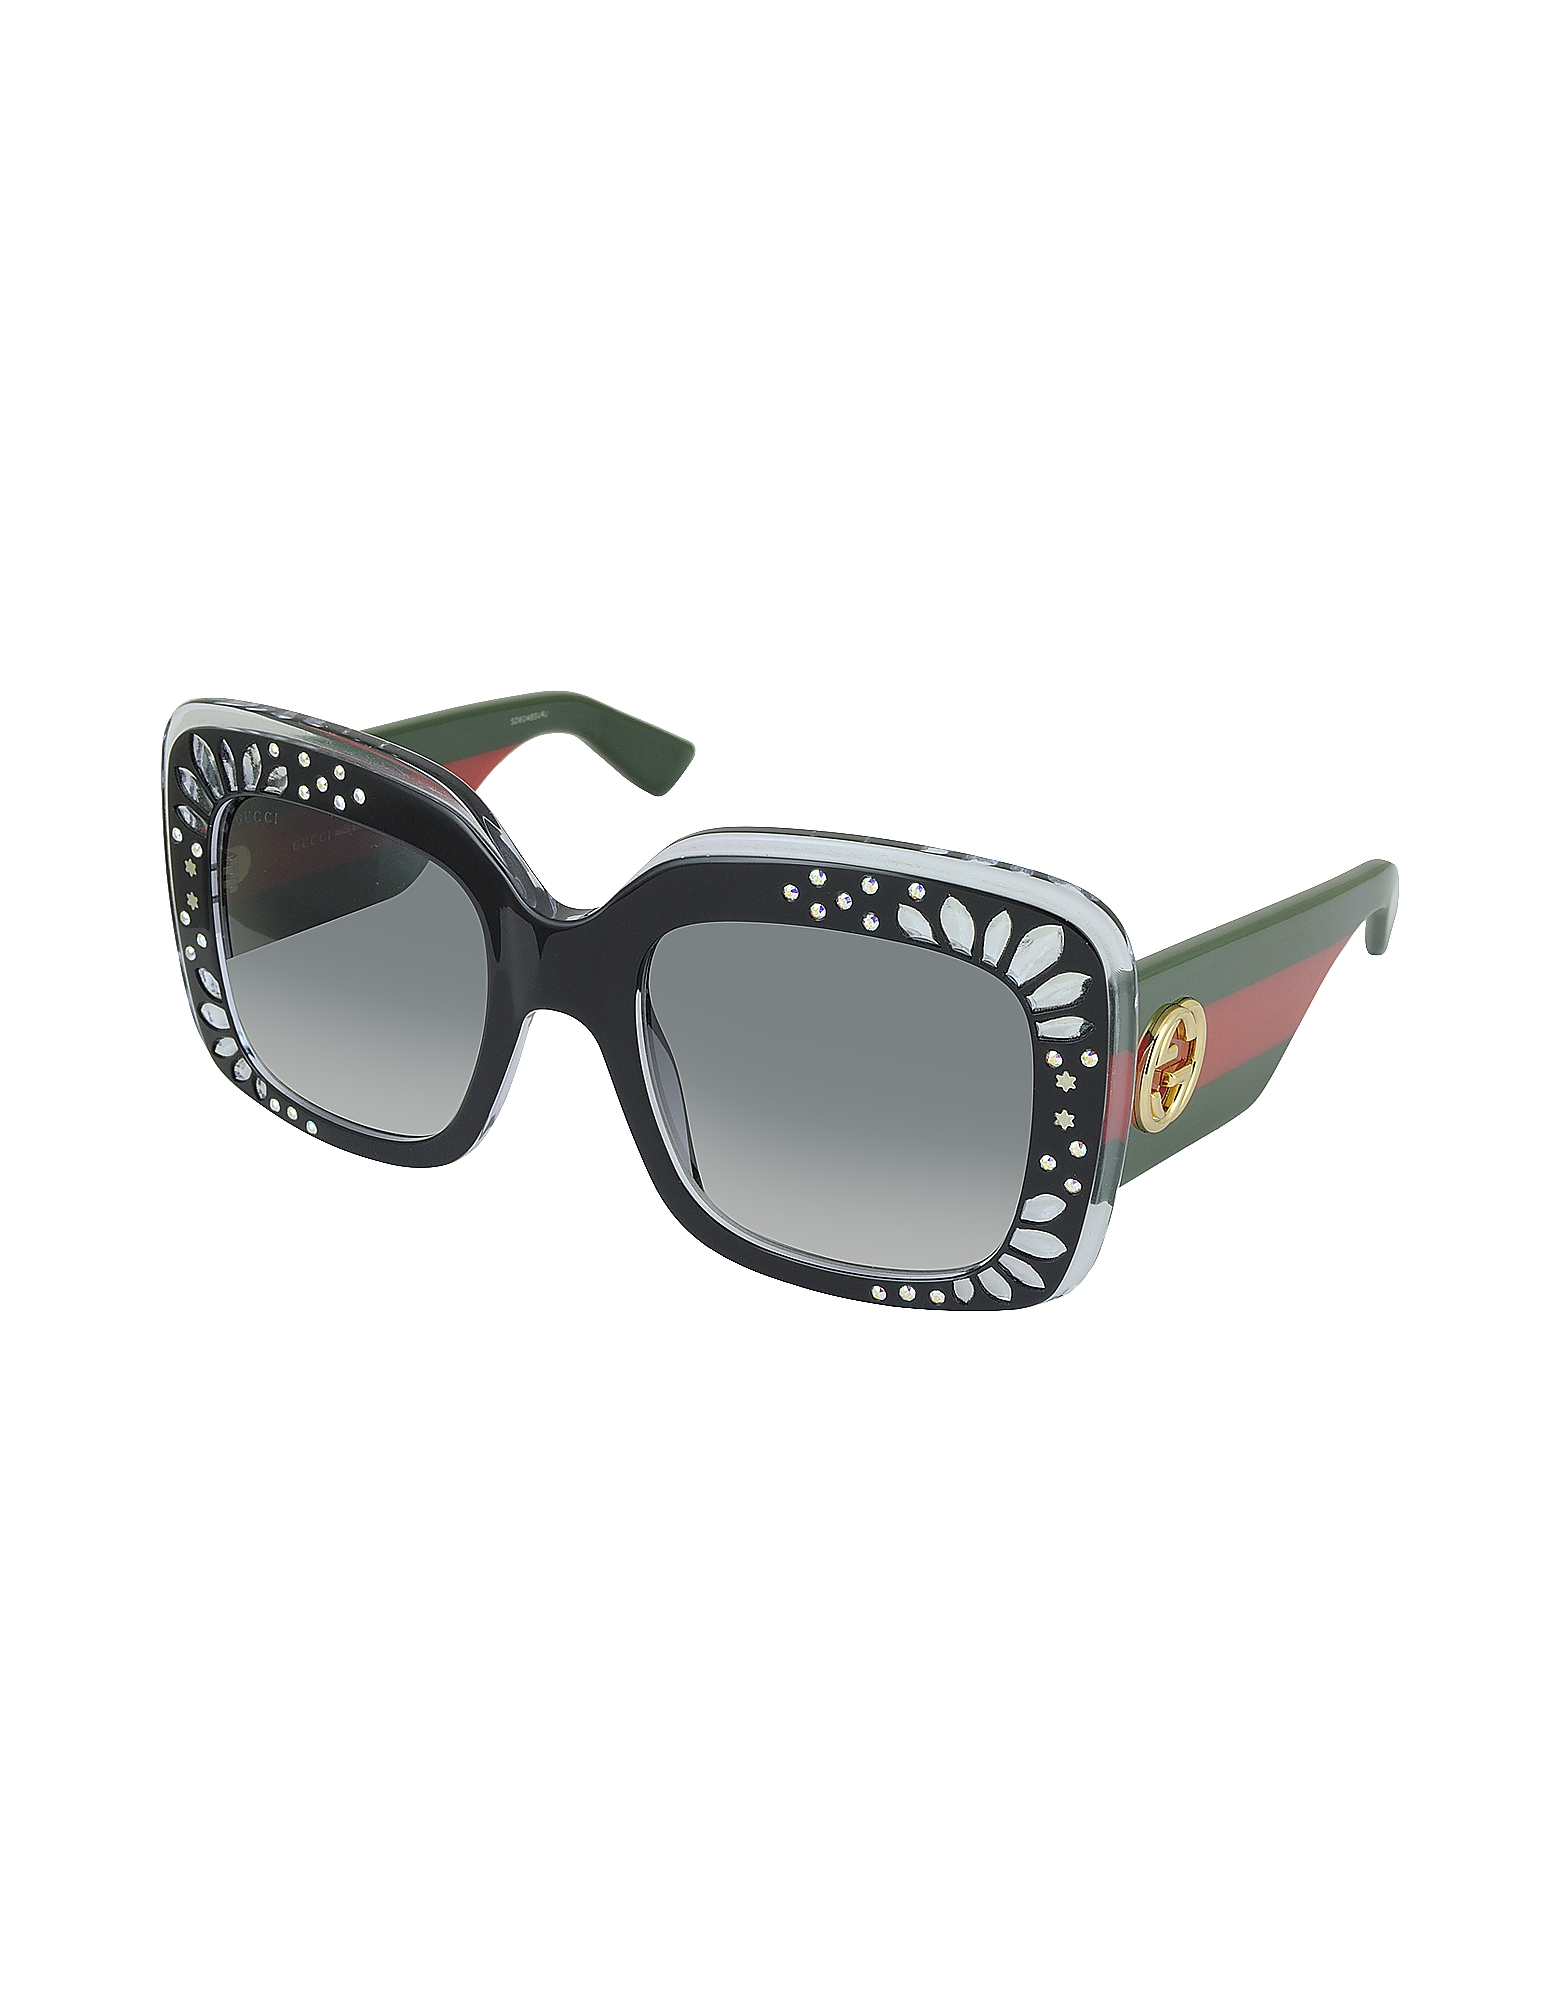 Red dead women for with rhinestones gucci sunglasses cheap xray cute